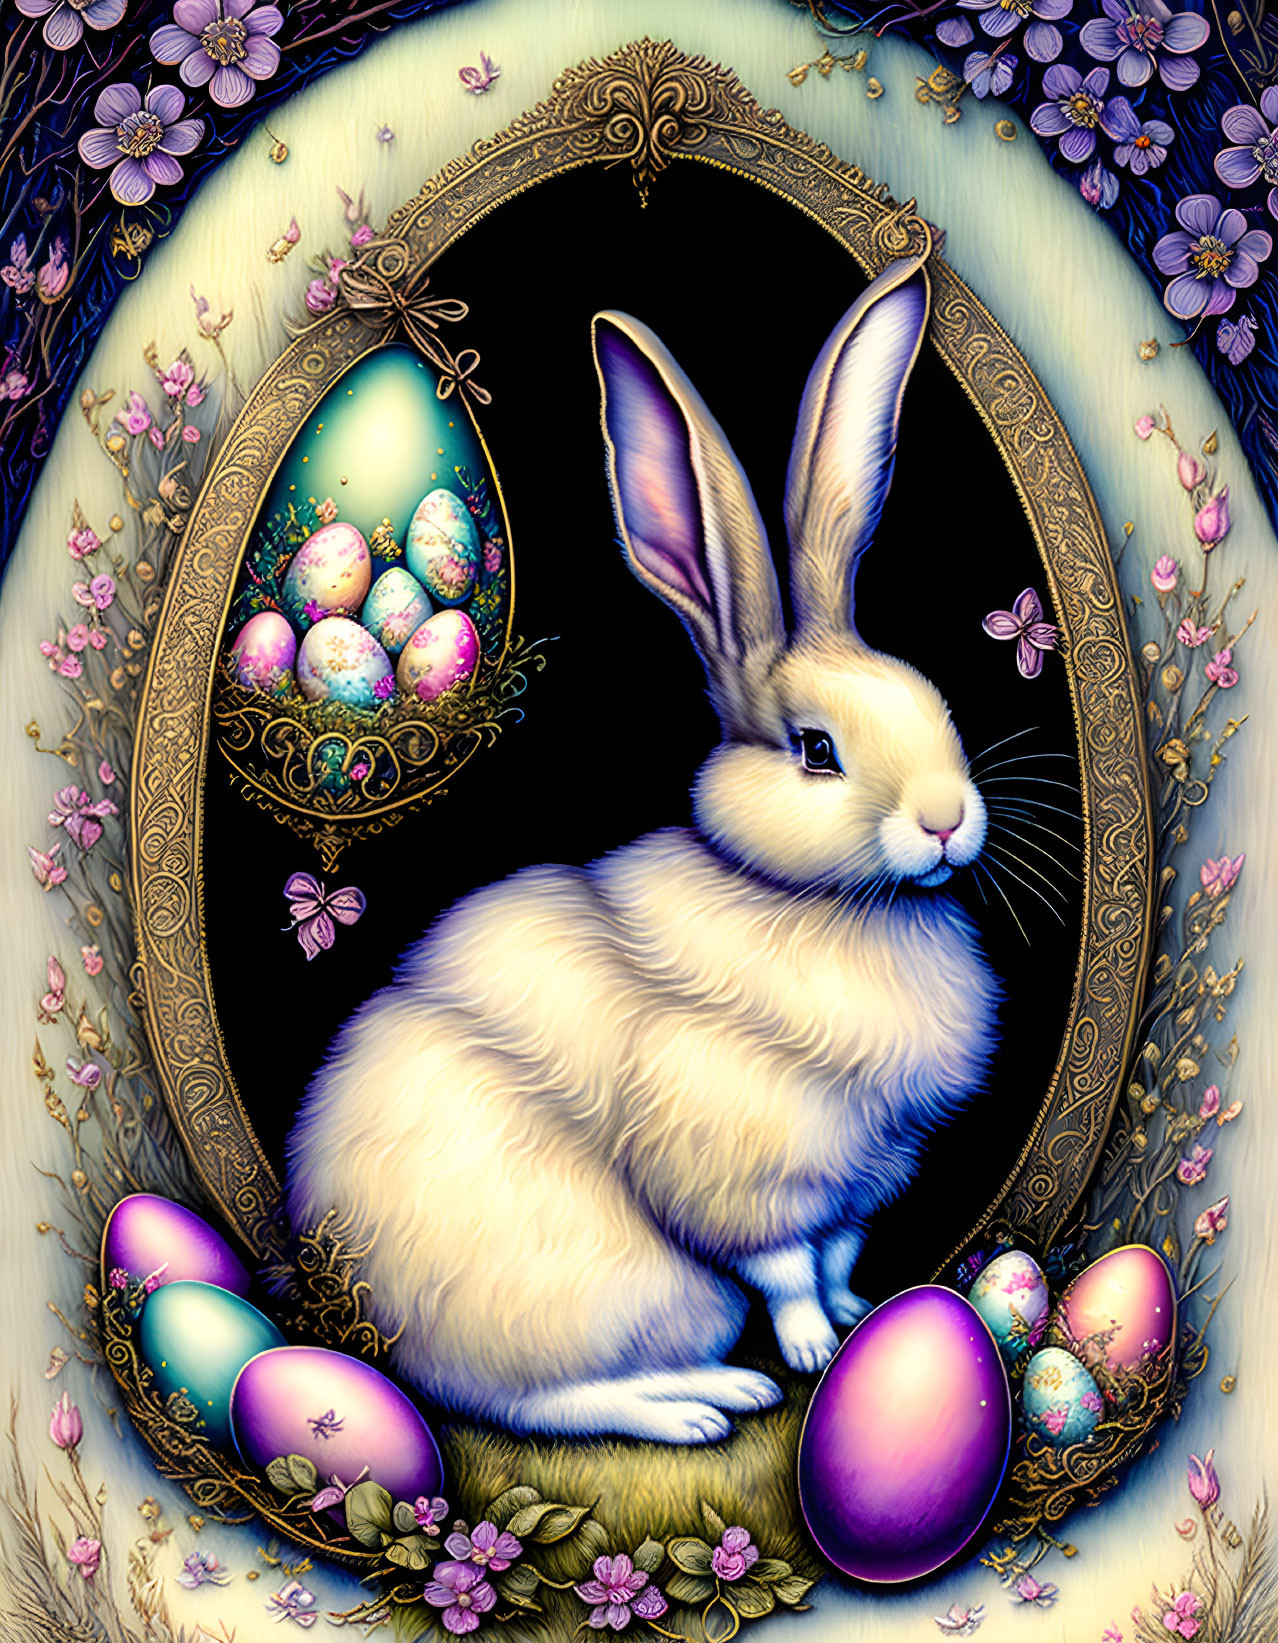 Illustrated rabbit with decorated eggs in ornate floral frame